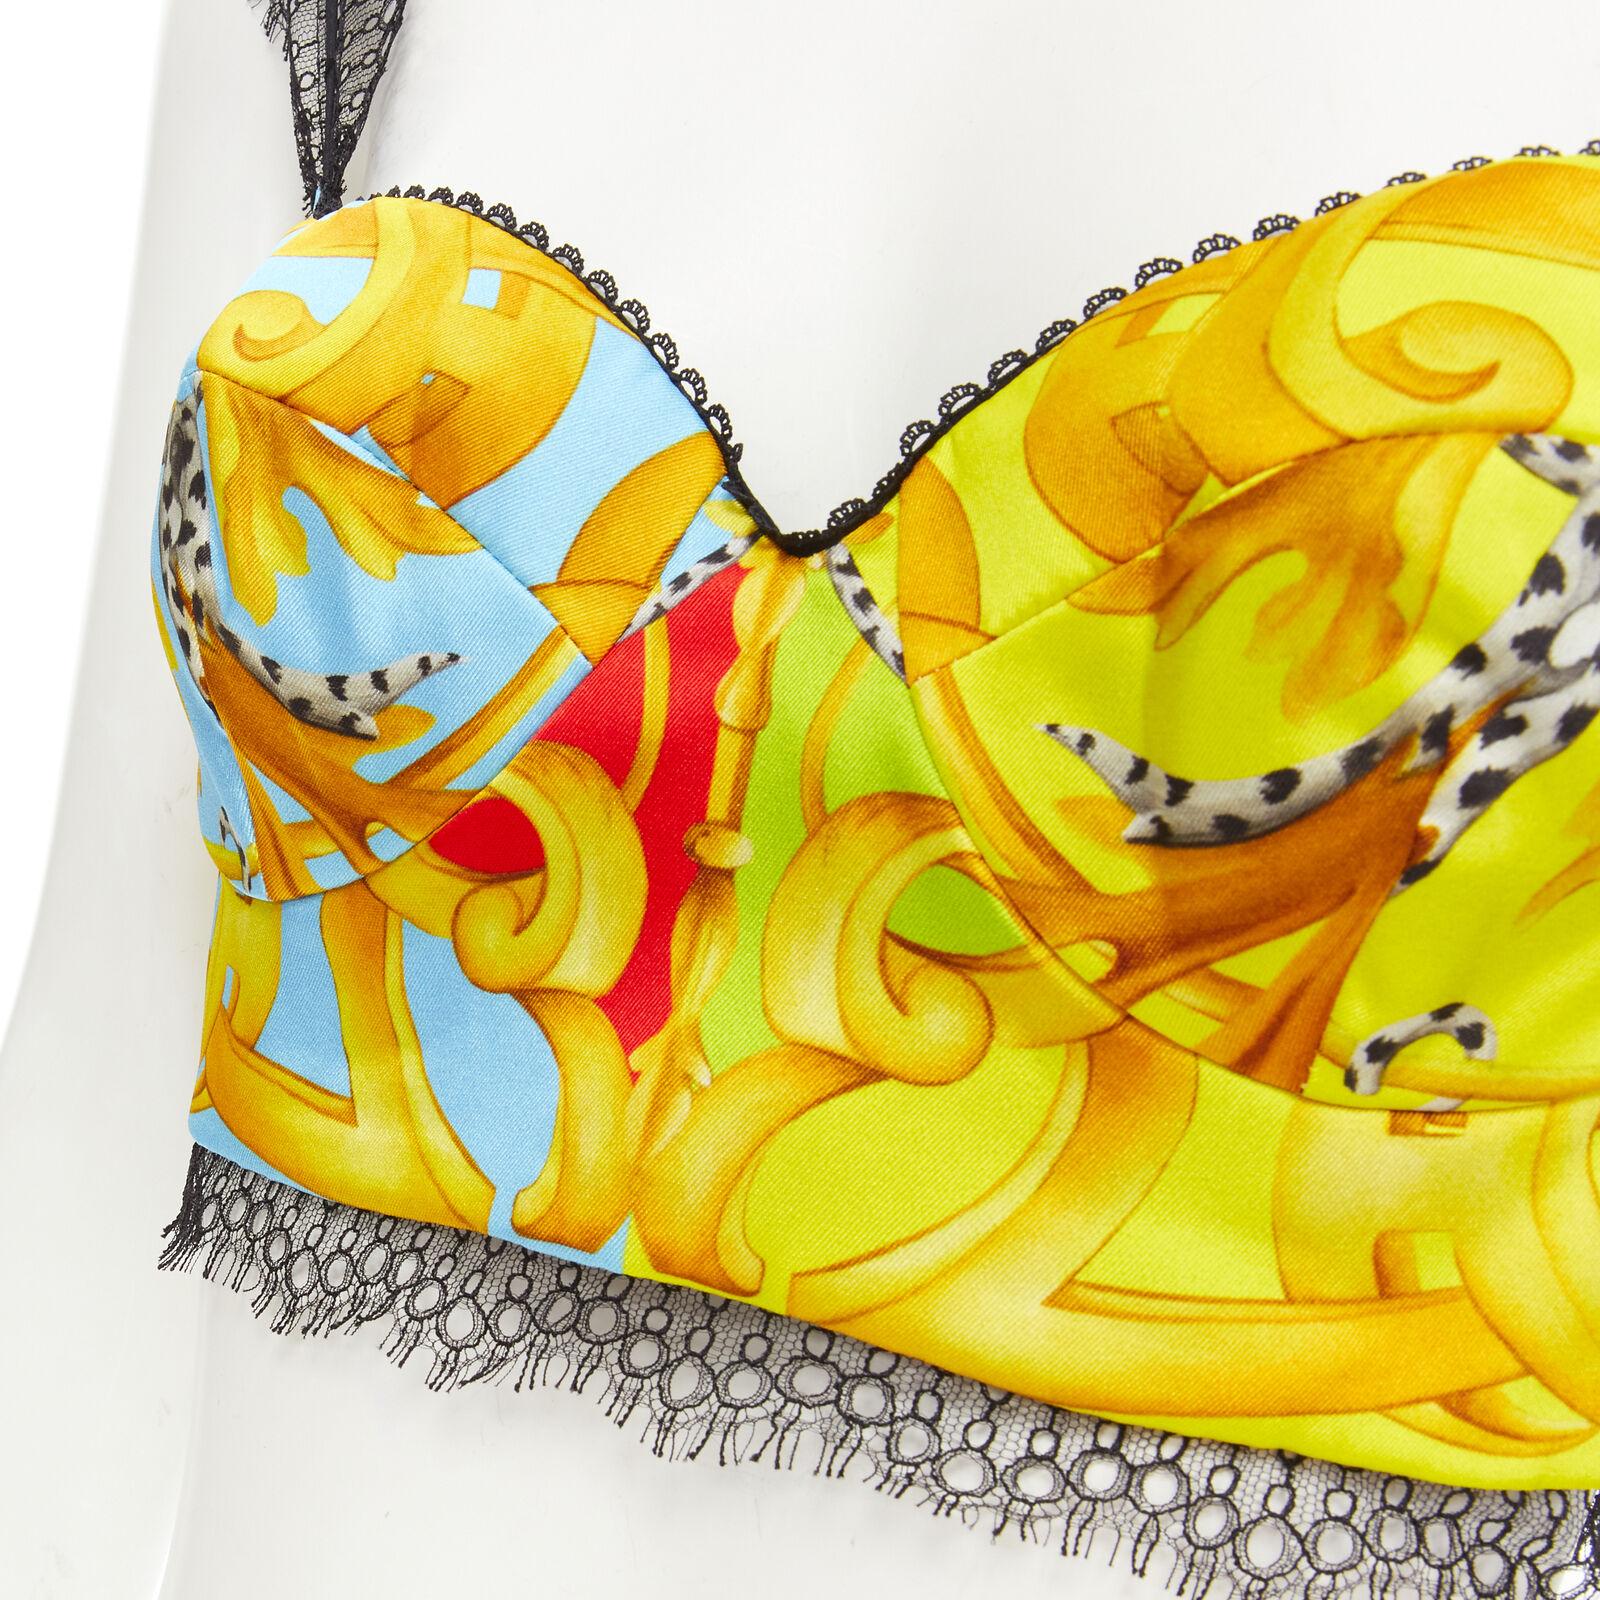 new VERSACE Barocco Acanthus Pop print lace trim boned bustier bra top IT42 M
Reference: TGAS/C01197
Brand: Versace
Designer: Donatella Versace
Model: A78760 A236443 A7000
Collection: Pop Acanthus Barocco
Material: Polyester
Color: Yellow
Pattern: